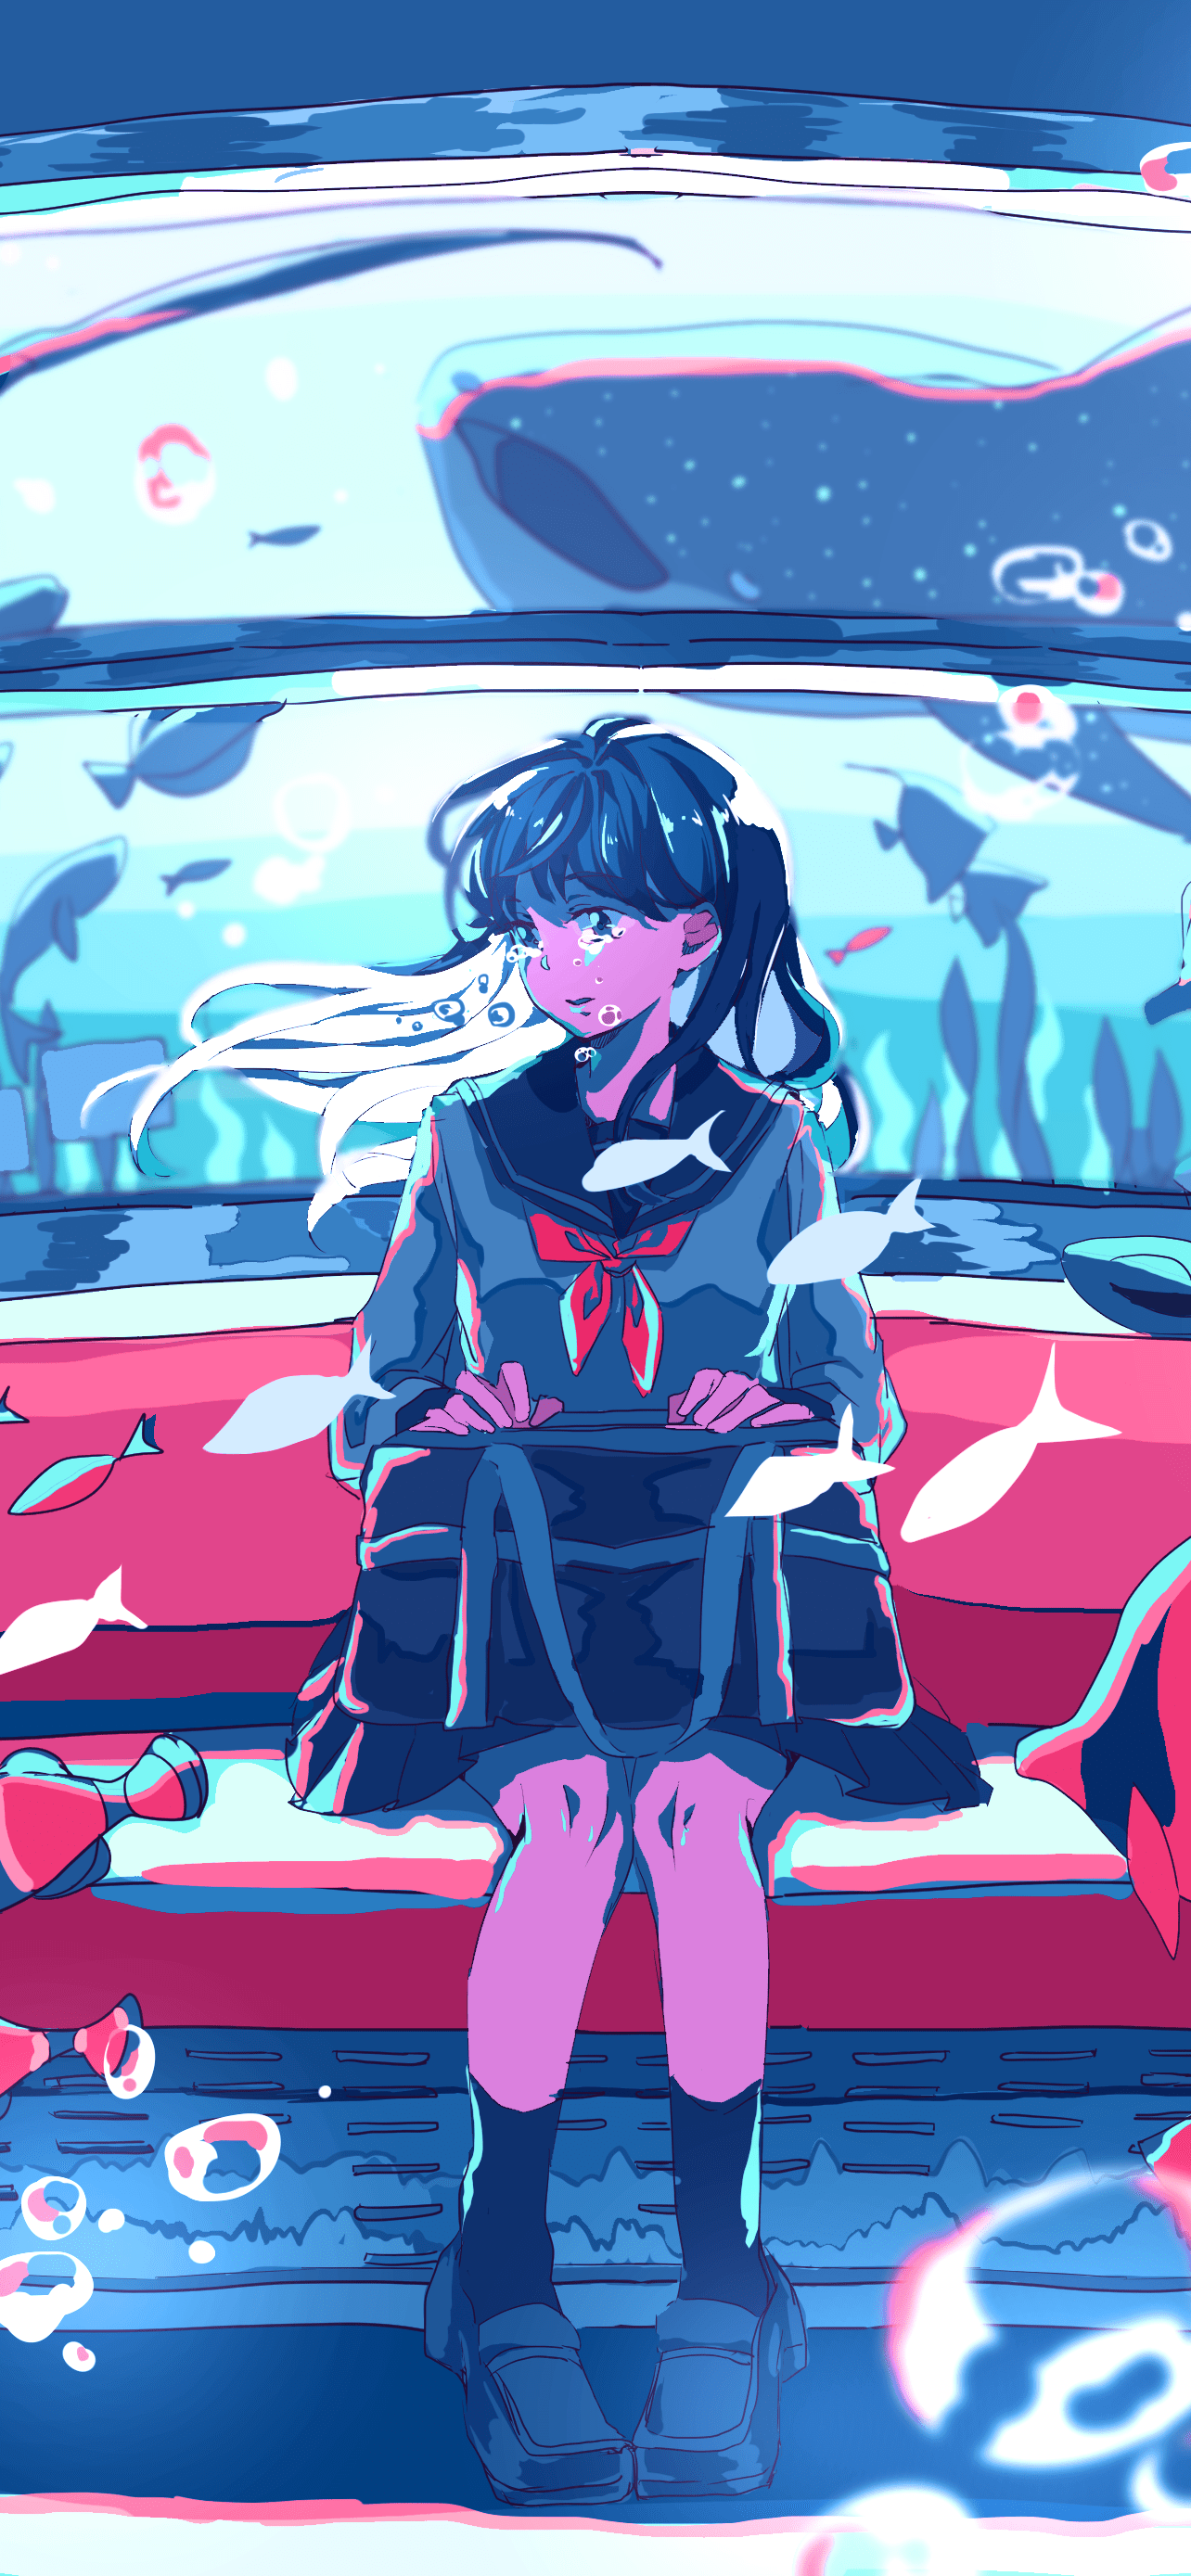 A girl with black hair in pigtails sits on a bench. - Underwater